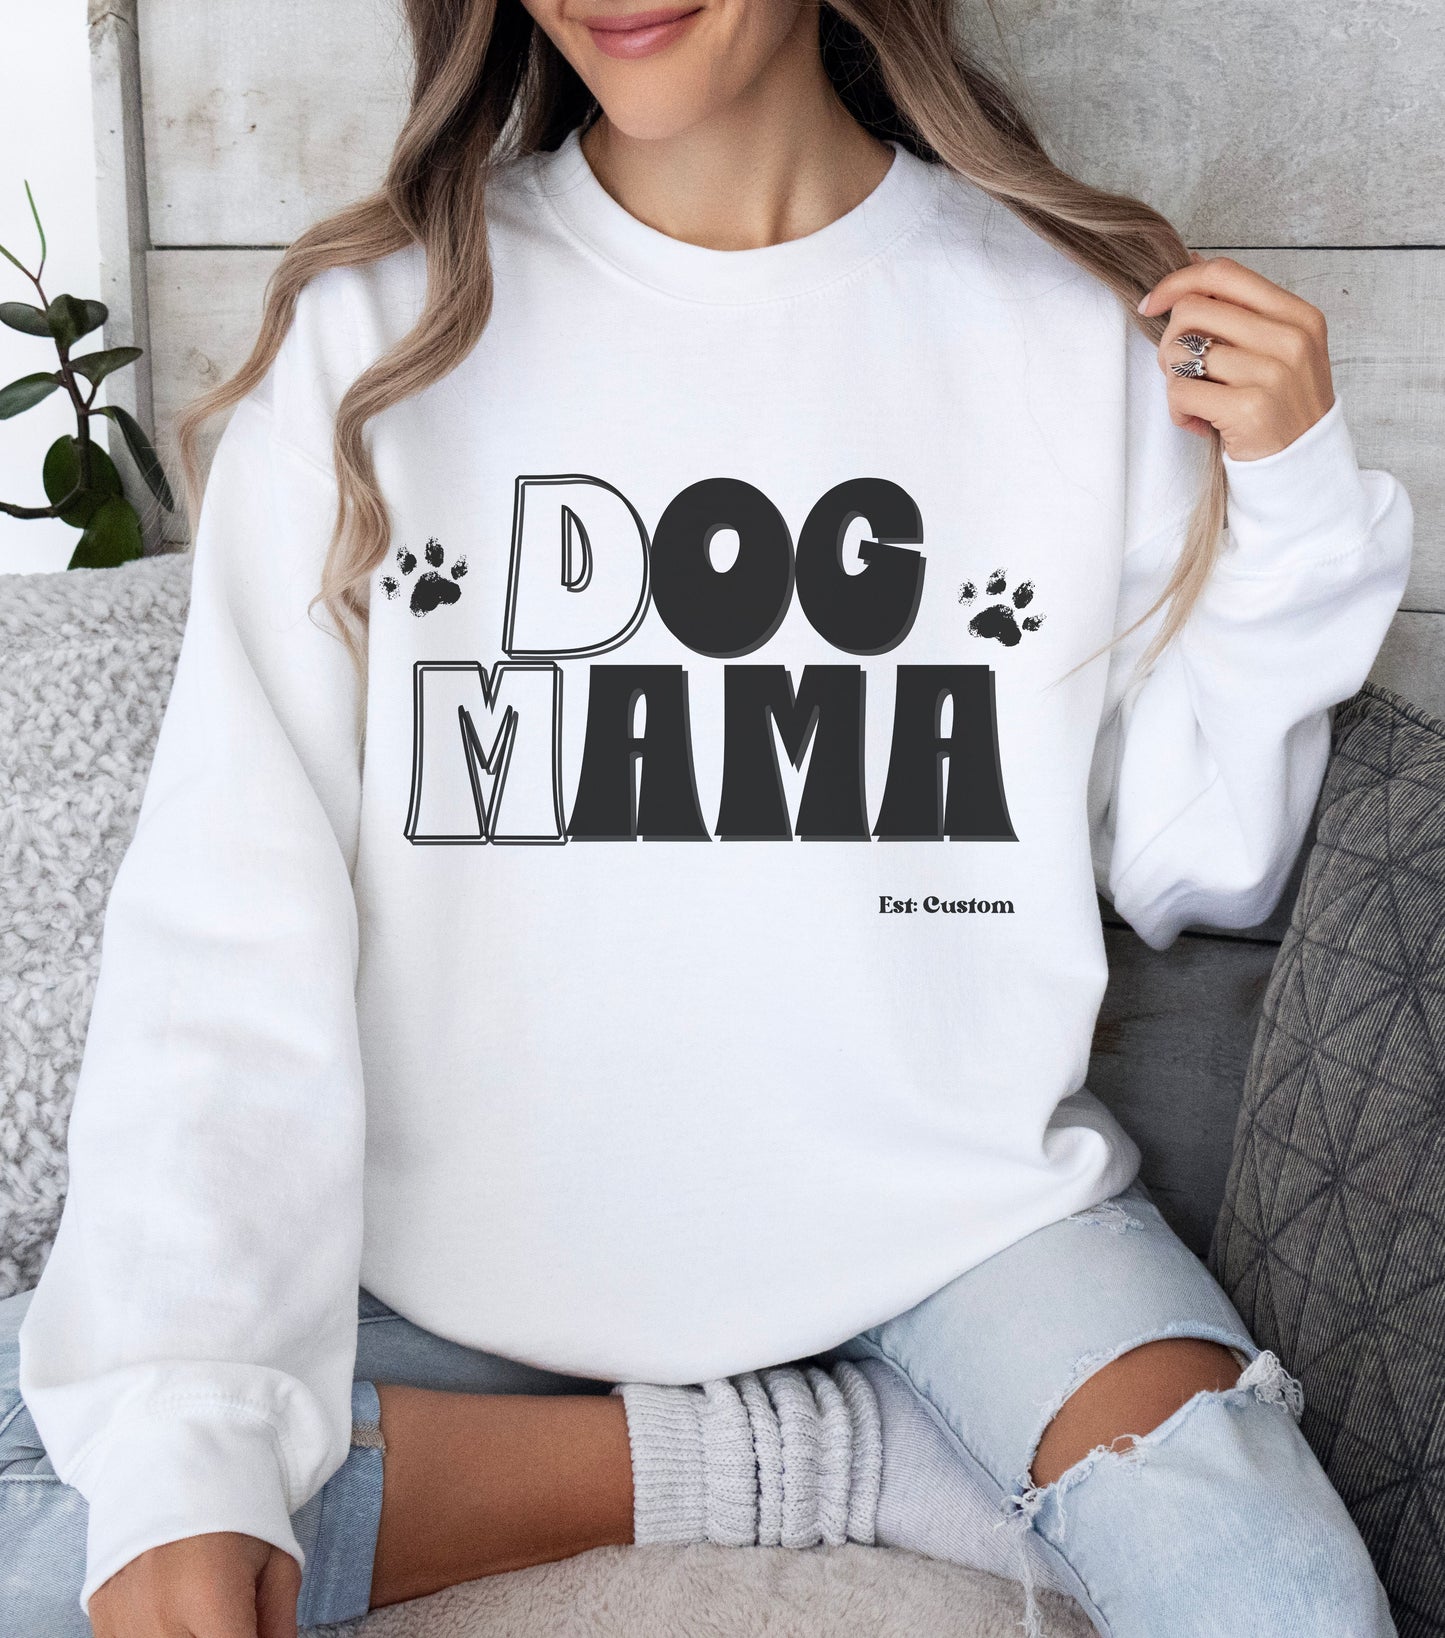 Personalized Dog Mama Sweatshirt unique Gift for Fur Moms